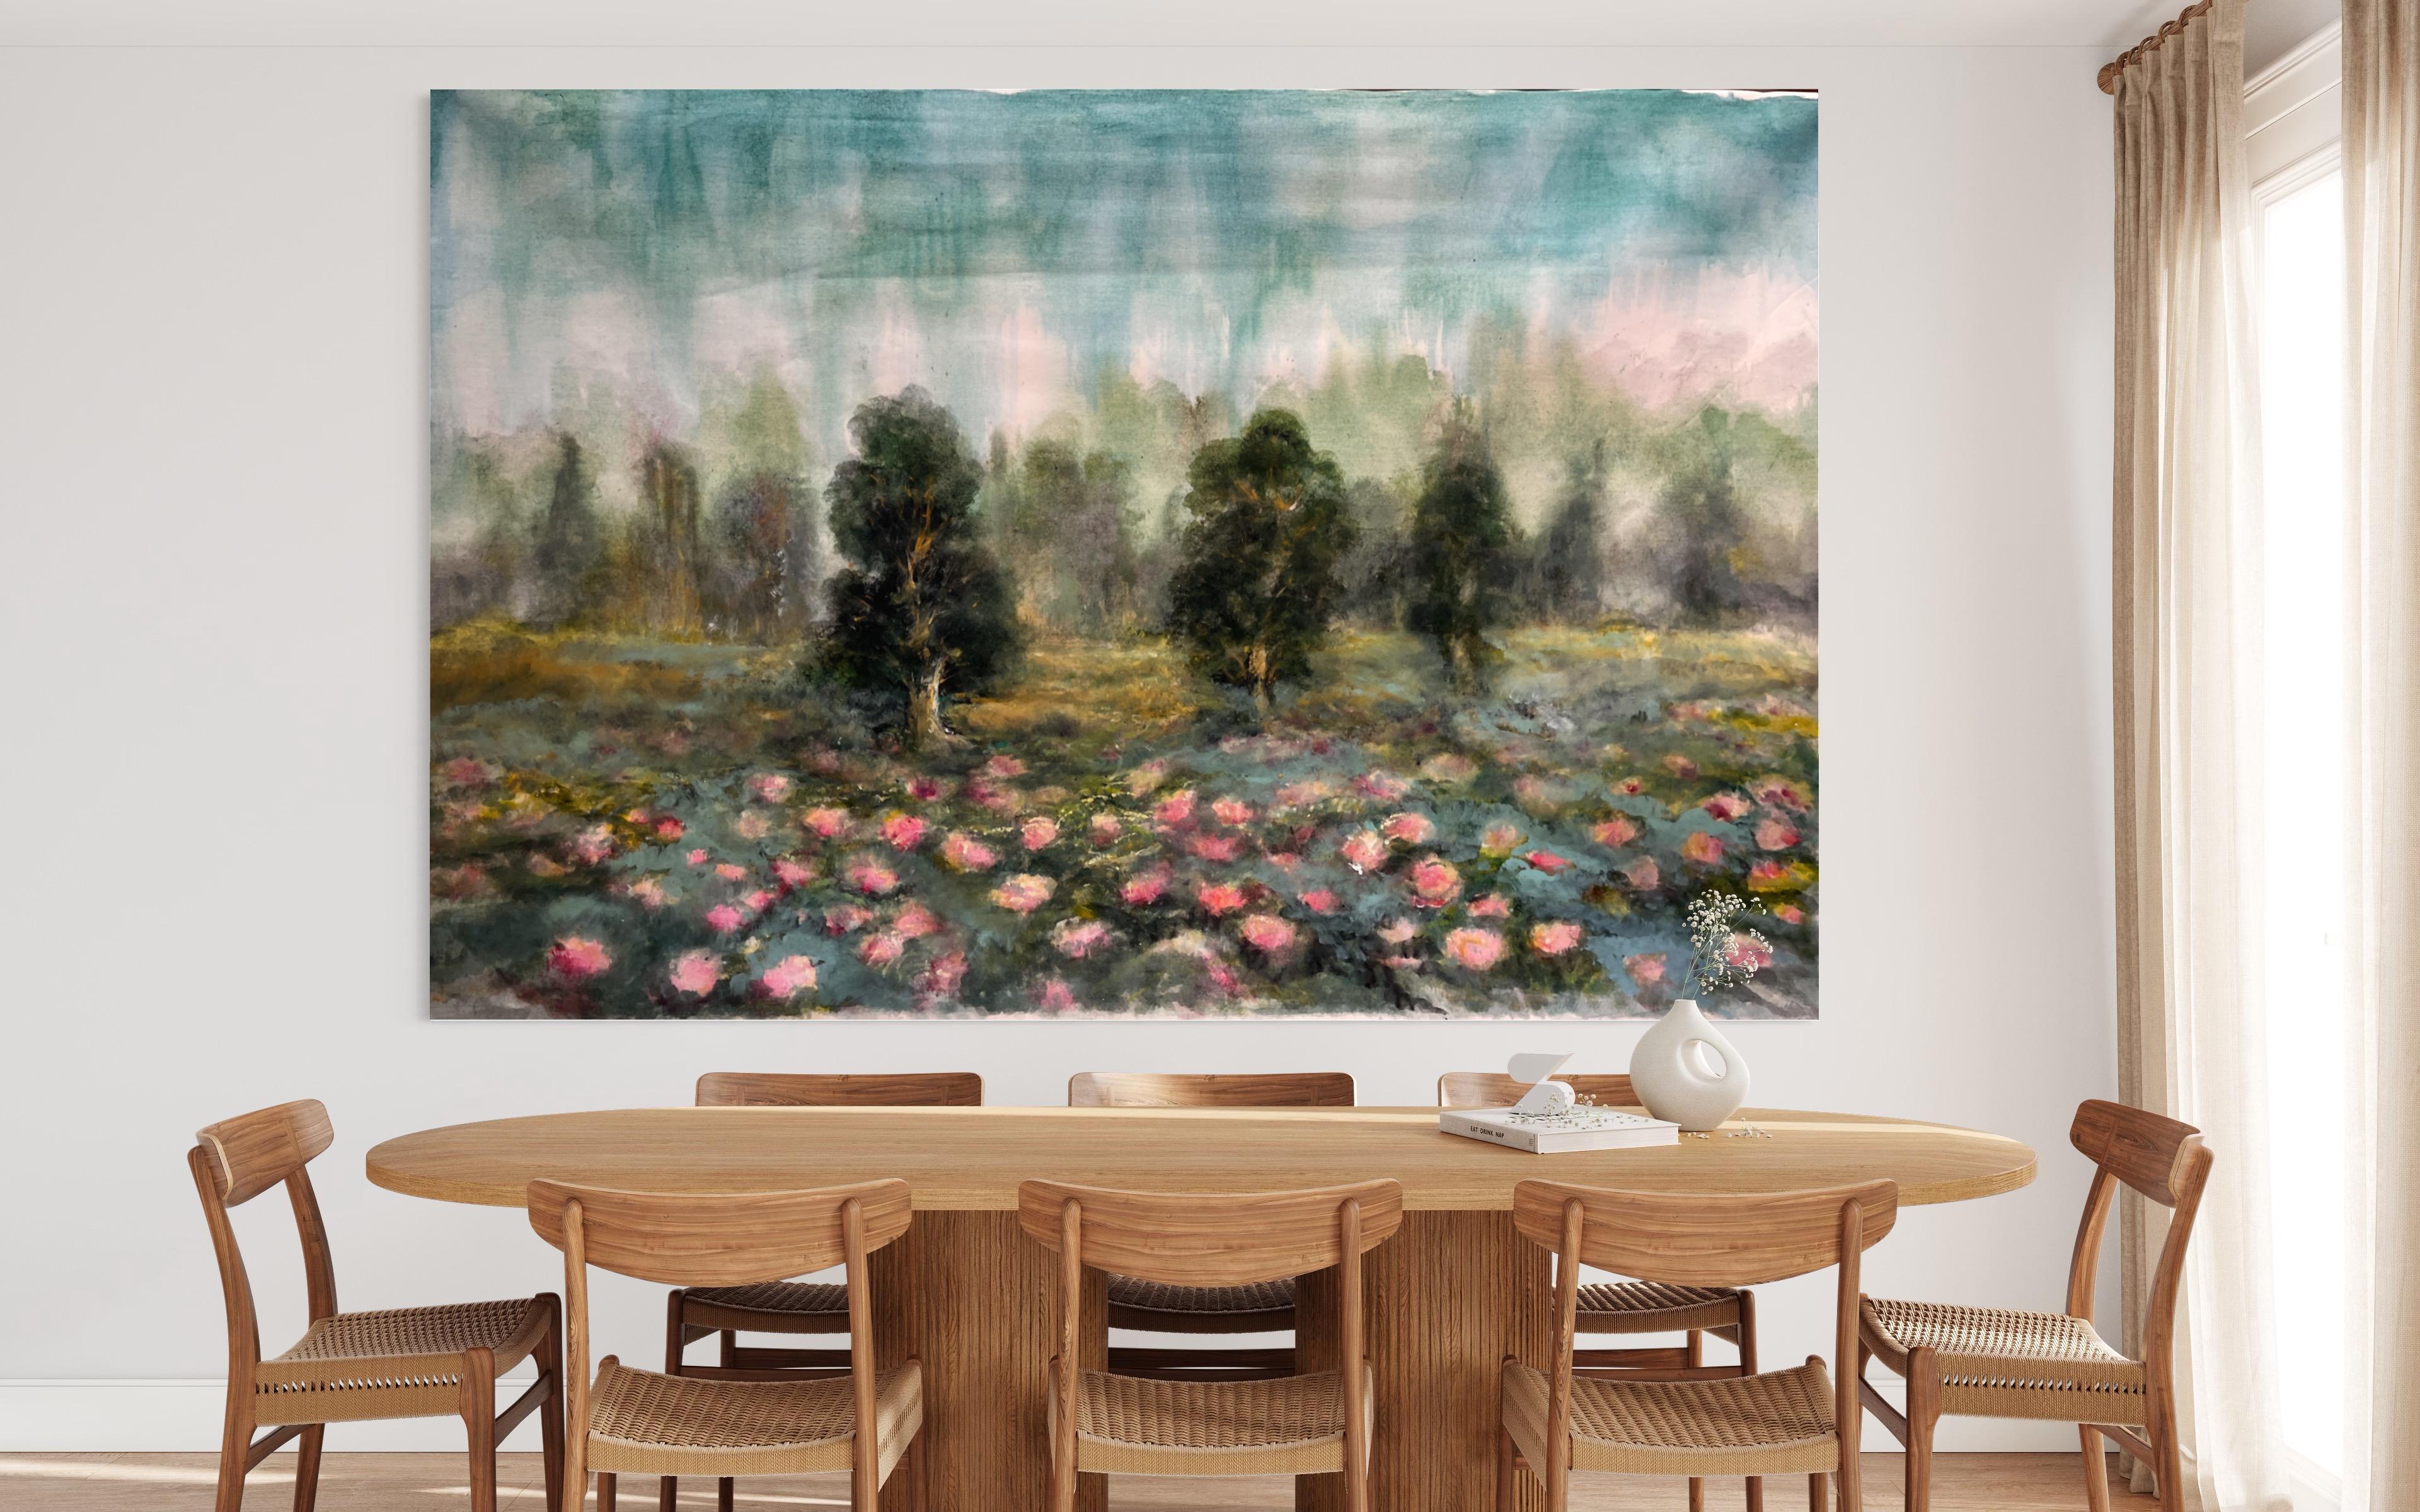 The landscape piece is a stunning representation of a serene and romantic setting, created in a unique impressionistic style. The artist has masterfully captured the essence of nature, infusing the artwork with a delicate and dreamlike quality.

In